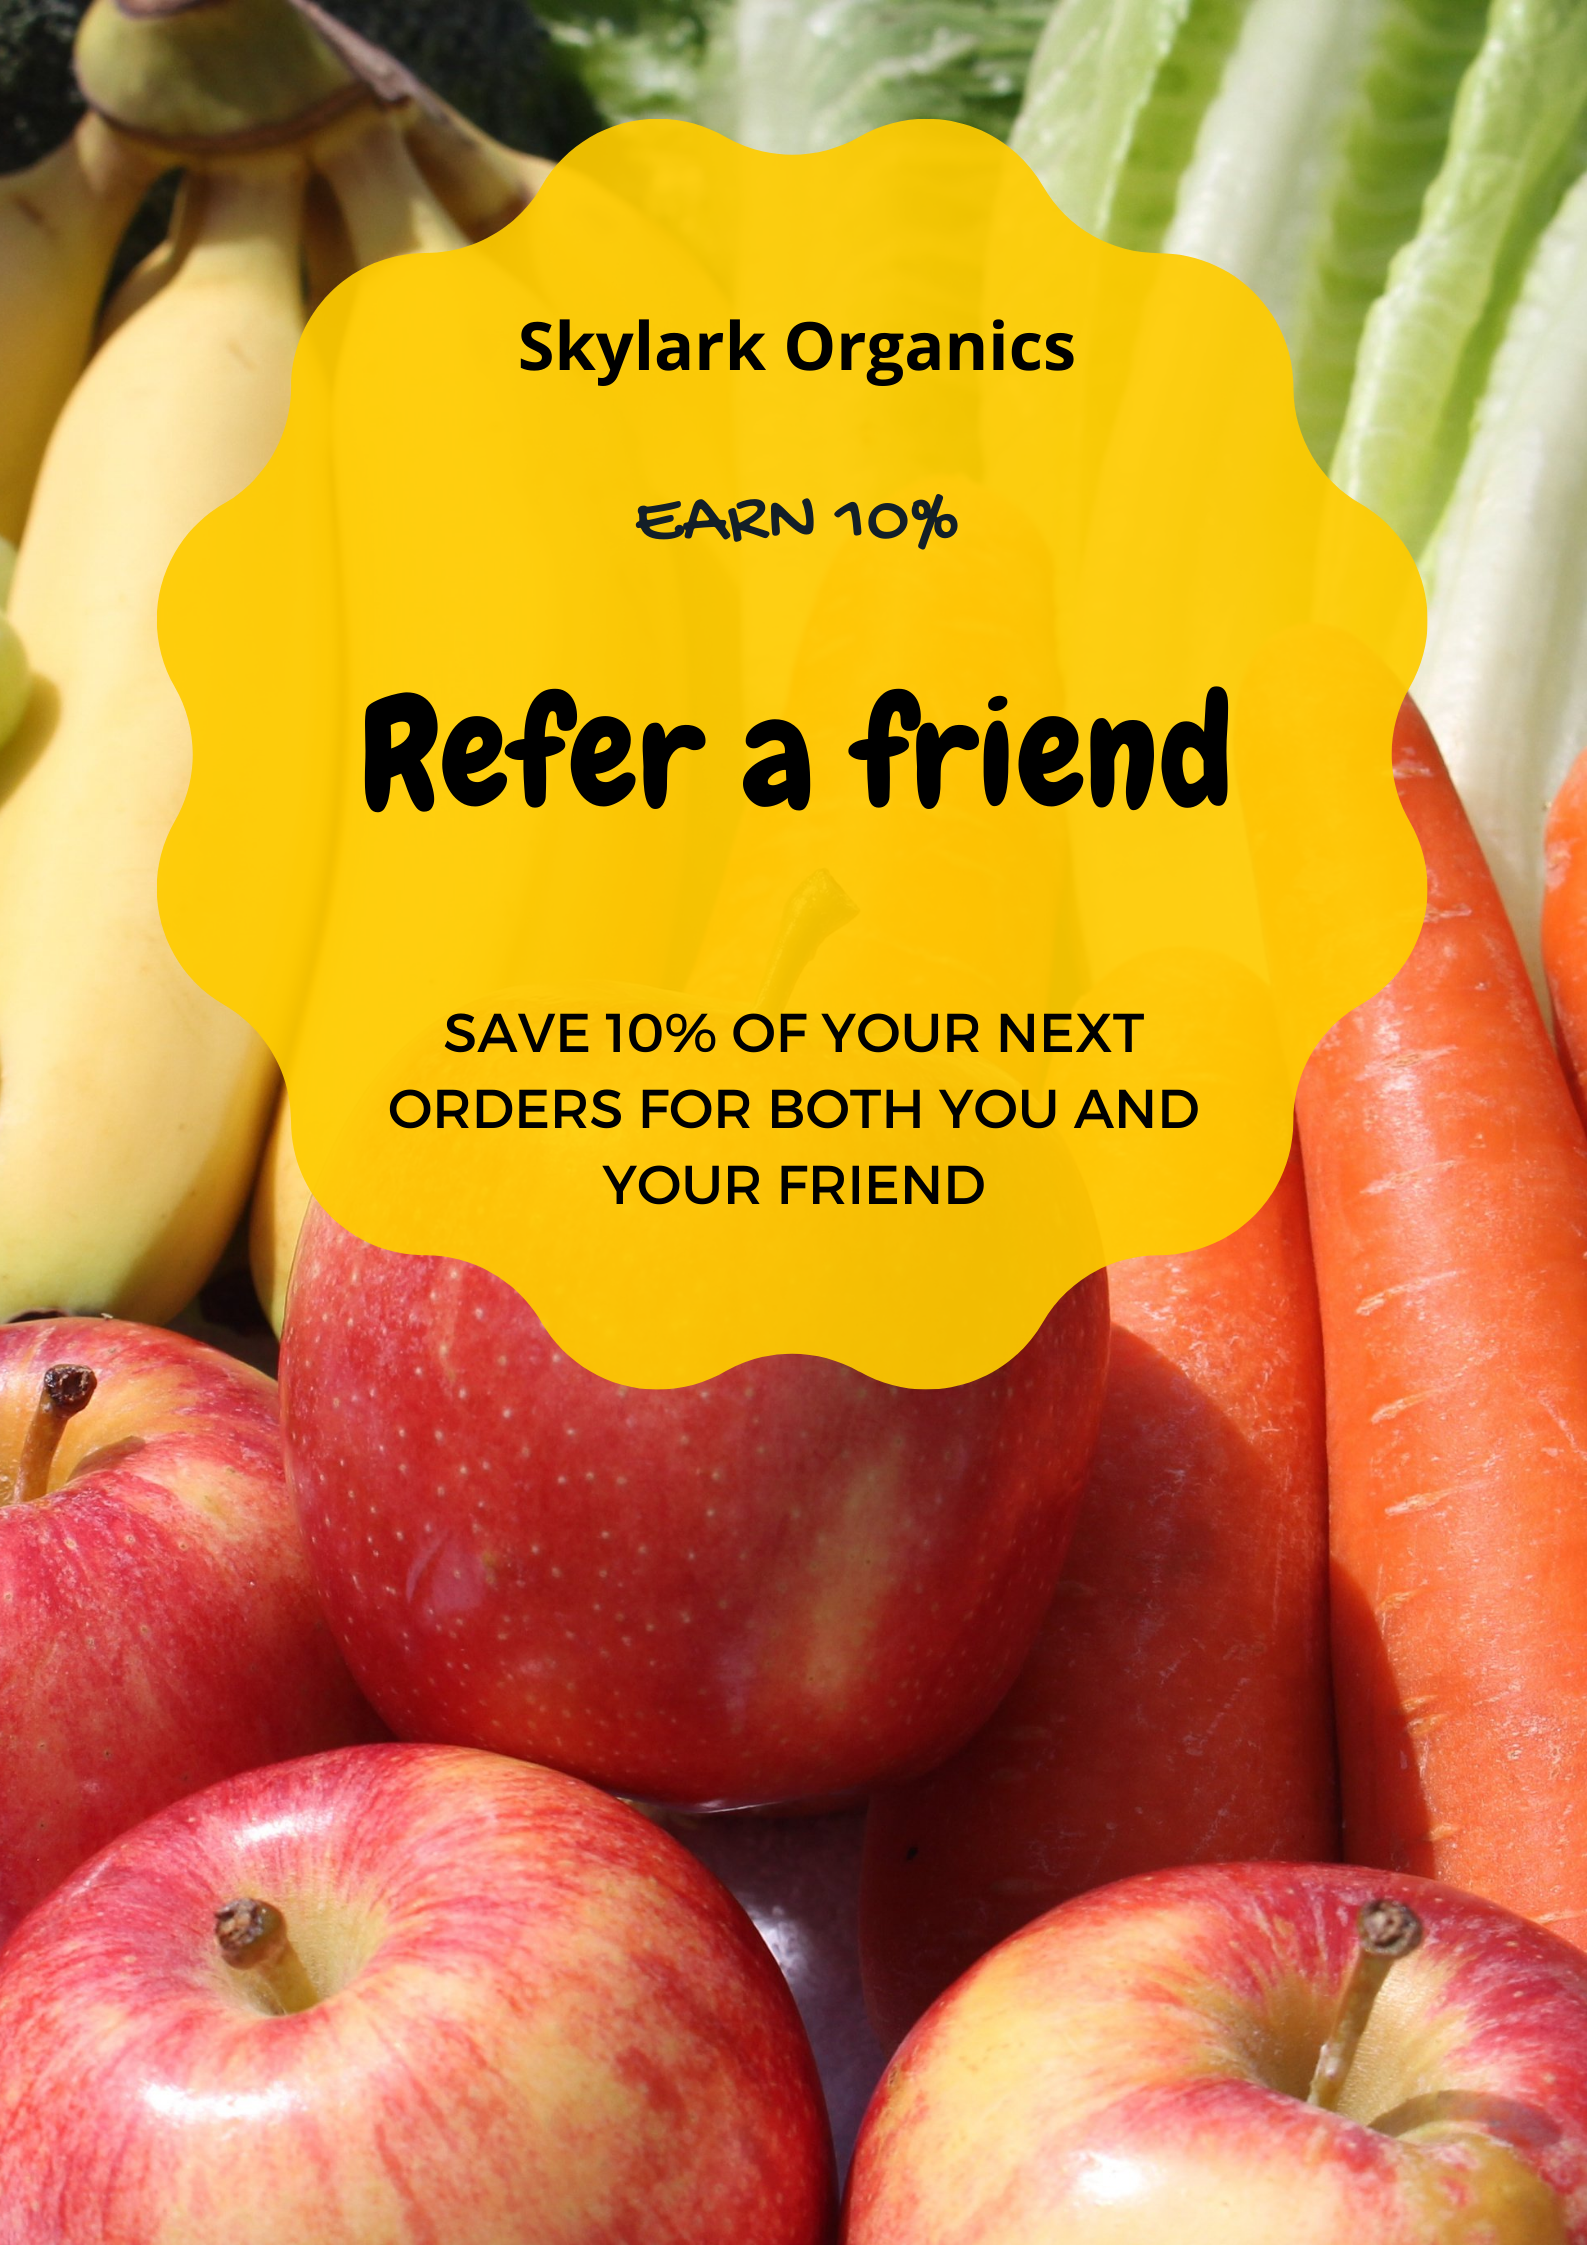 Image showing fruit and vegetables with the phrase refer a friend and receive 10% discount